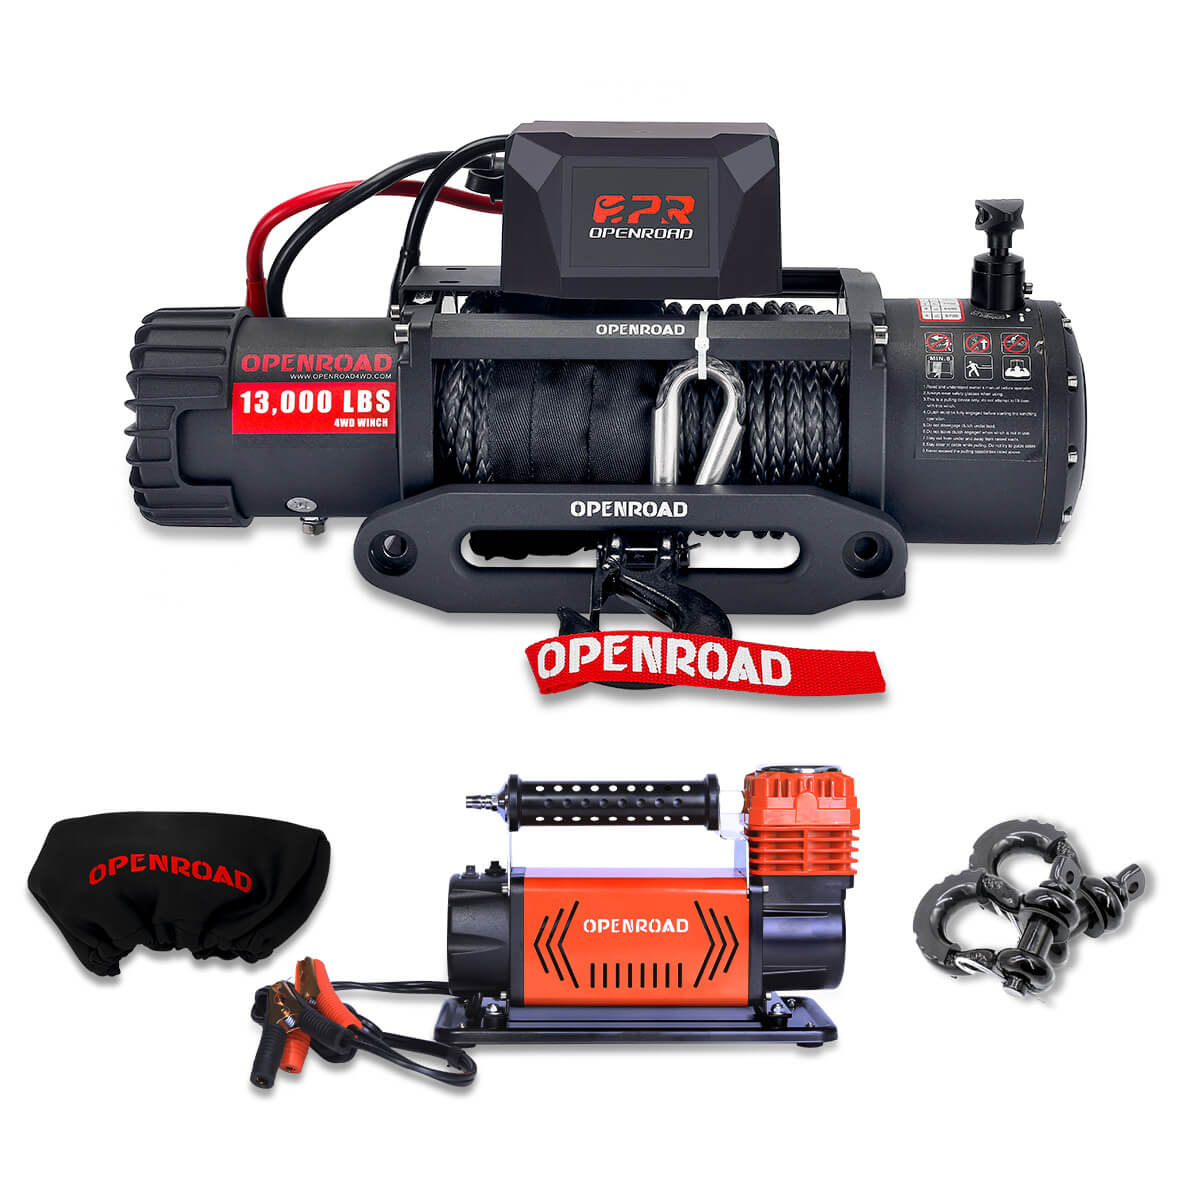 13000 lbs electric winch with cover + 5.65 CFM air compressor + 3/4" D-ring shackle  openroad4wd.com   